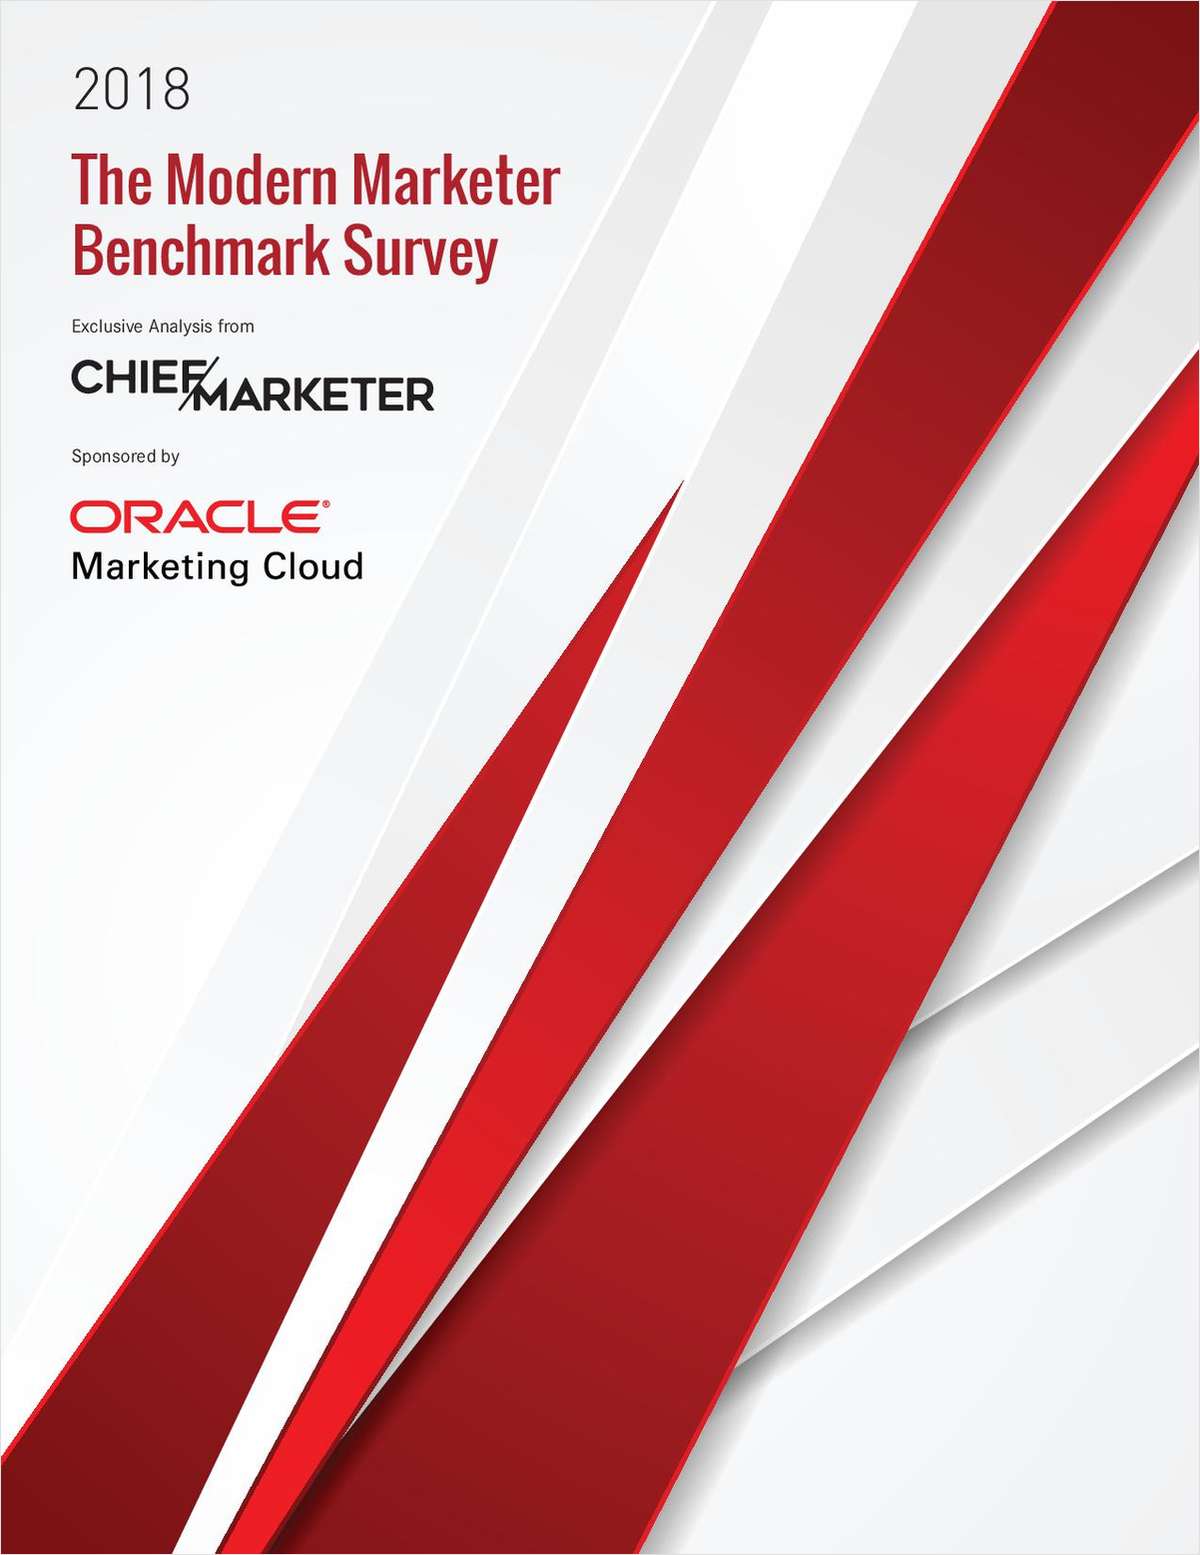 The Modern Marketer Benchmark Survey: The Pulse of Marketers on Today's Top Issues and Priorities